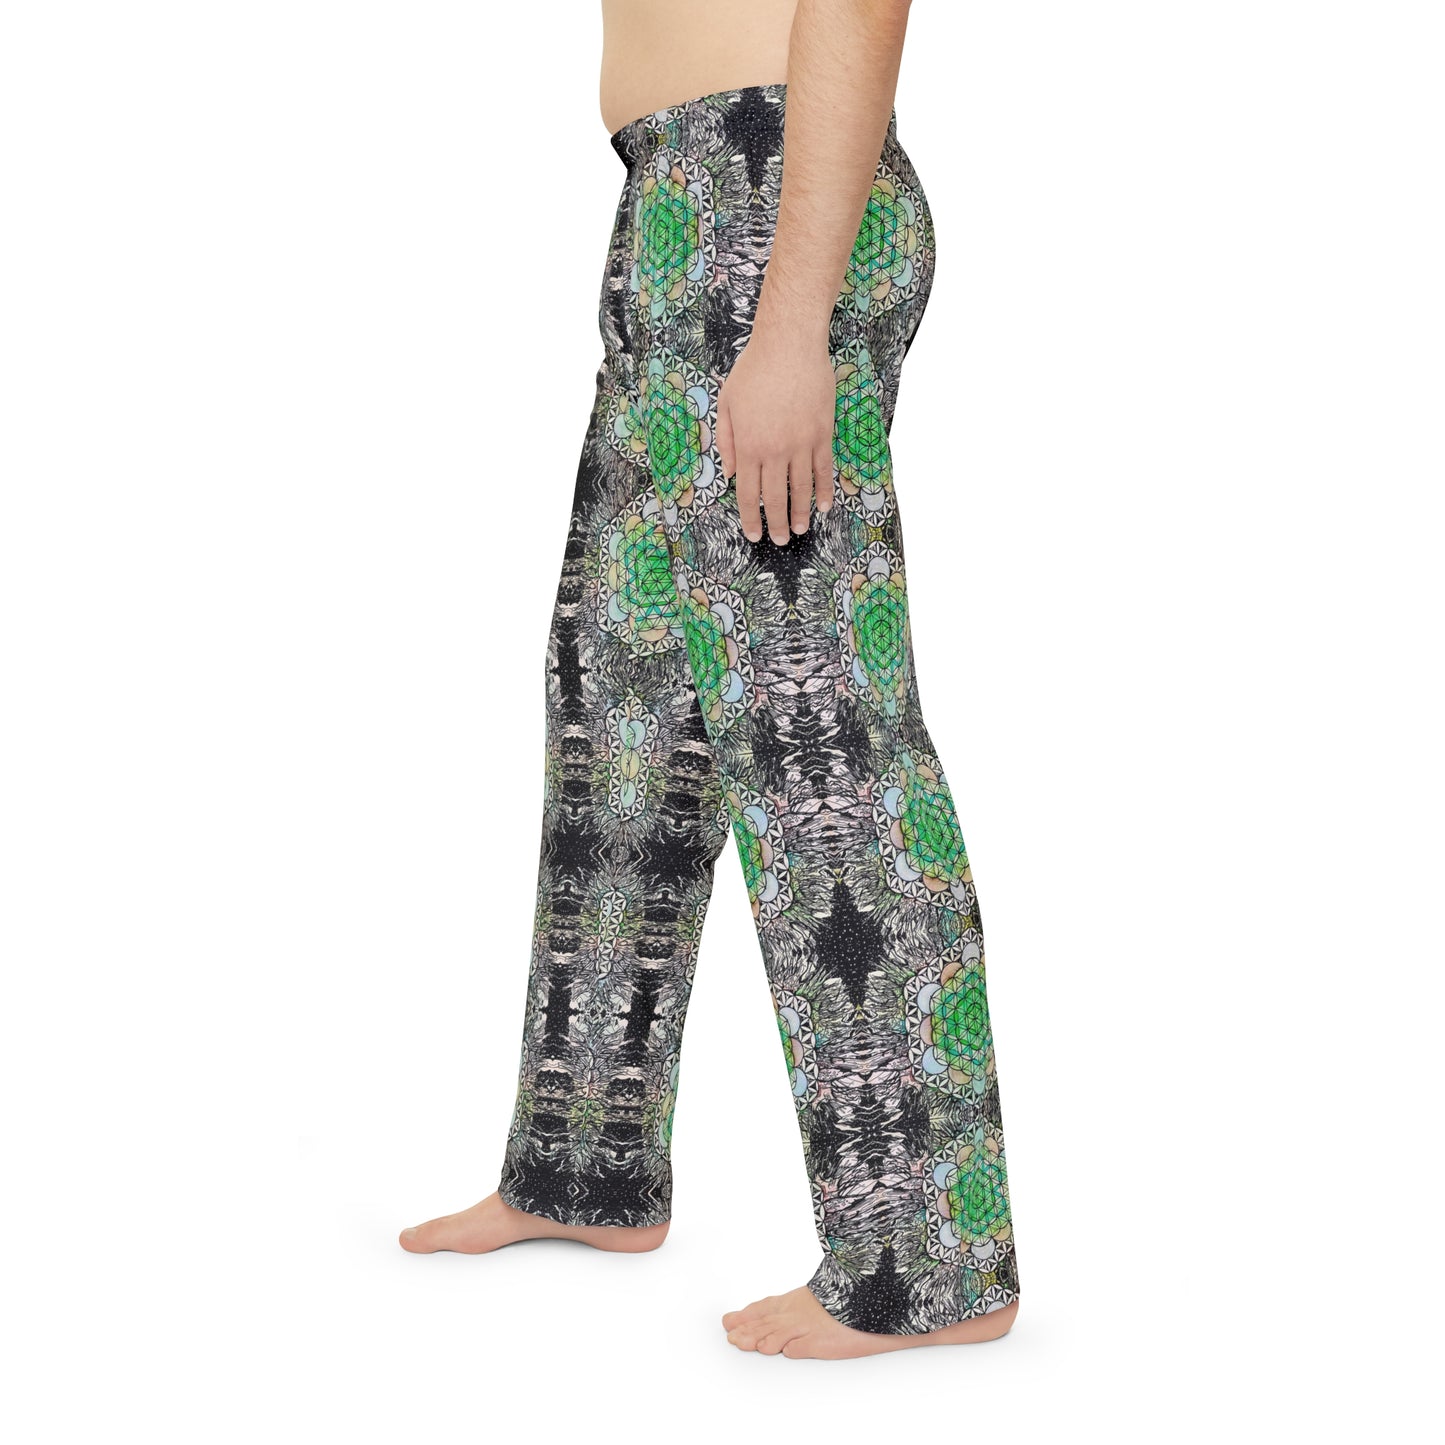 PJ's for DJ's (or anyone actually)